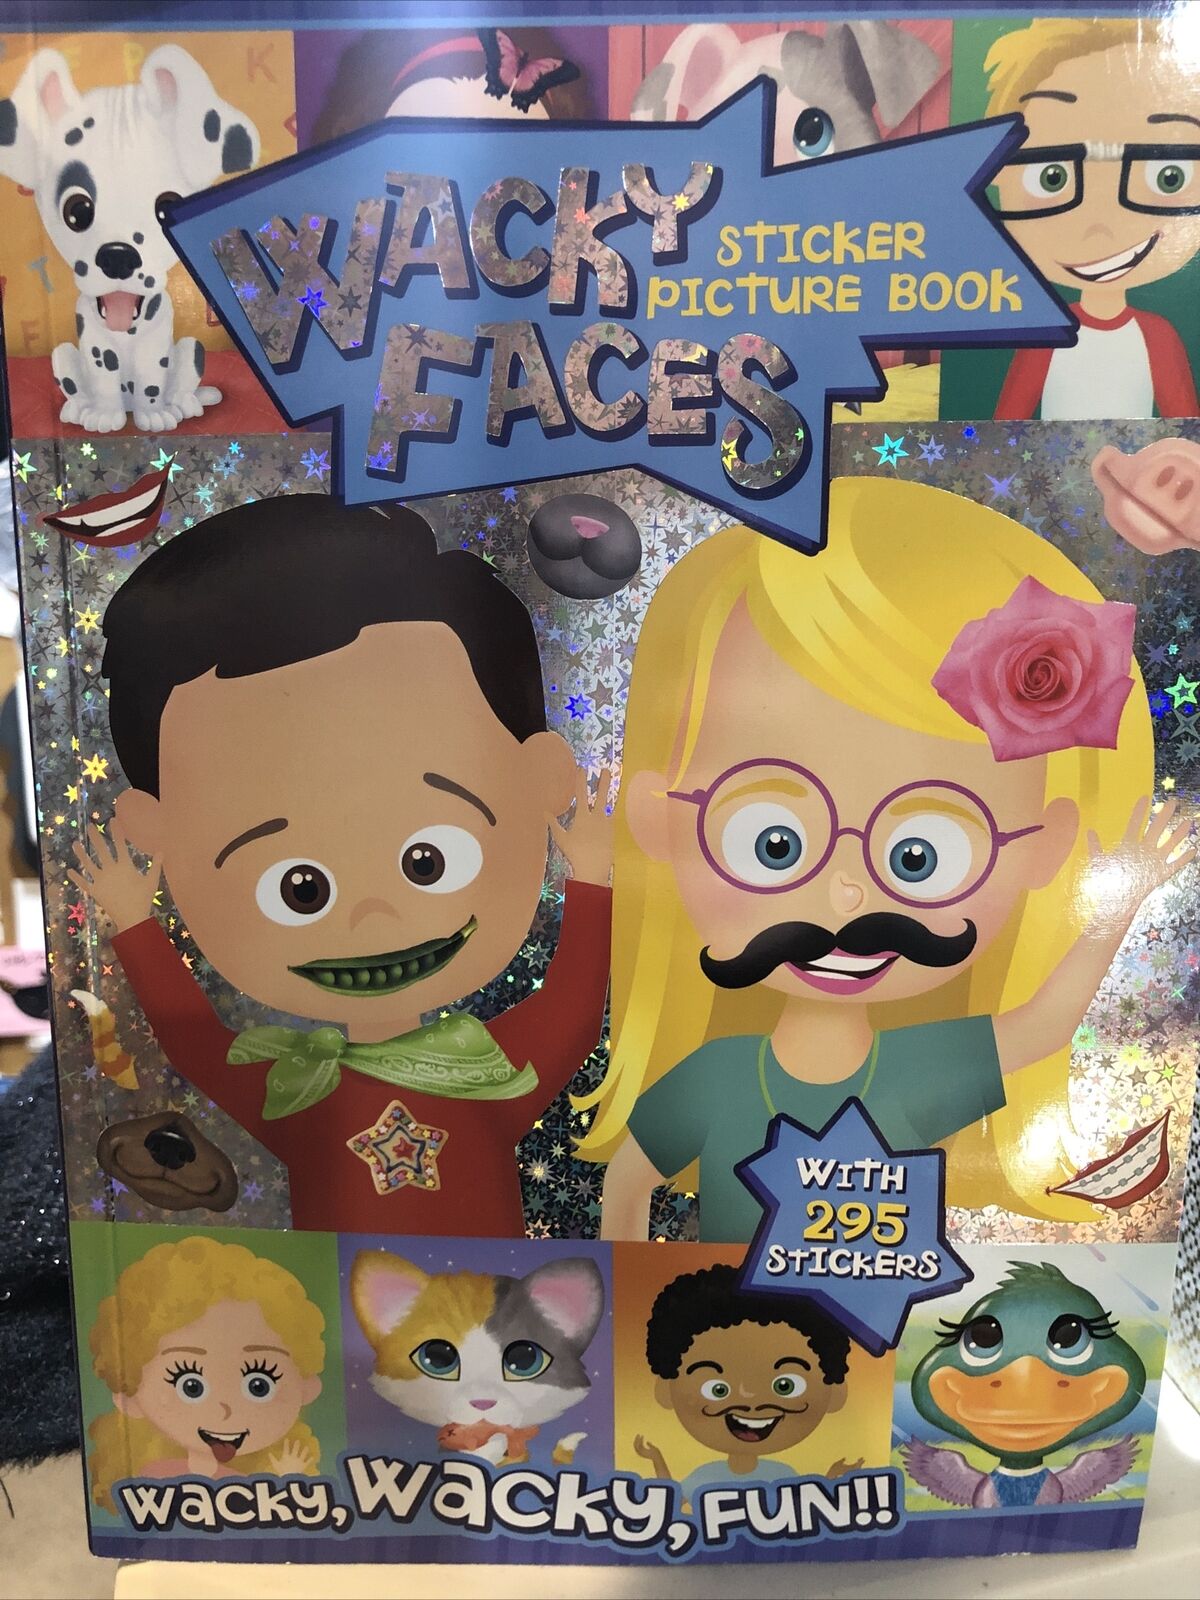 Wacky Faces Picture Sticker Book (with 150 Stickers For Wacky, Wacky Fun)  (e)